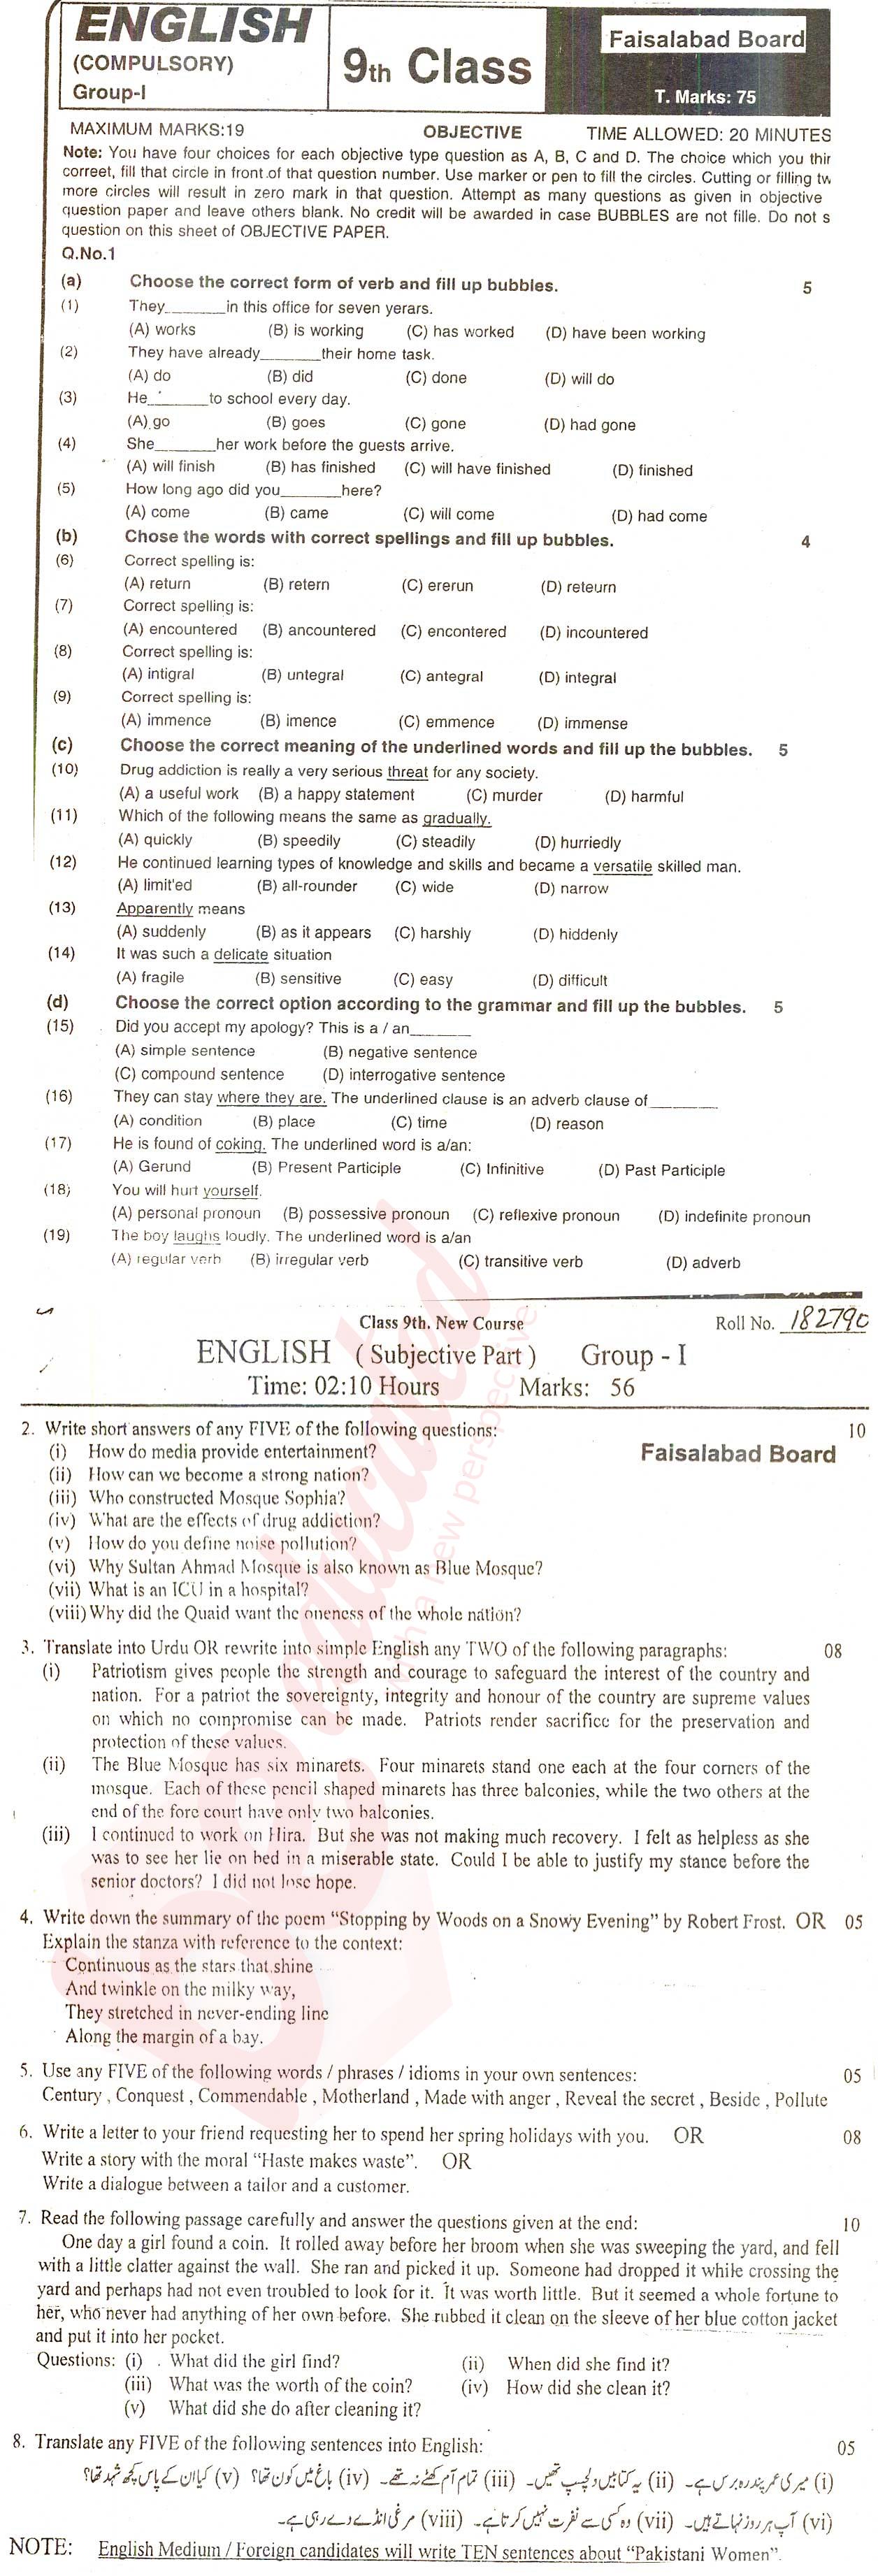 English 9th class Past Paper Group 1 BISE Faisalabad 2016